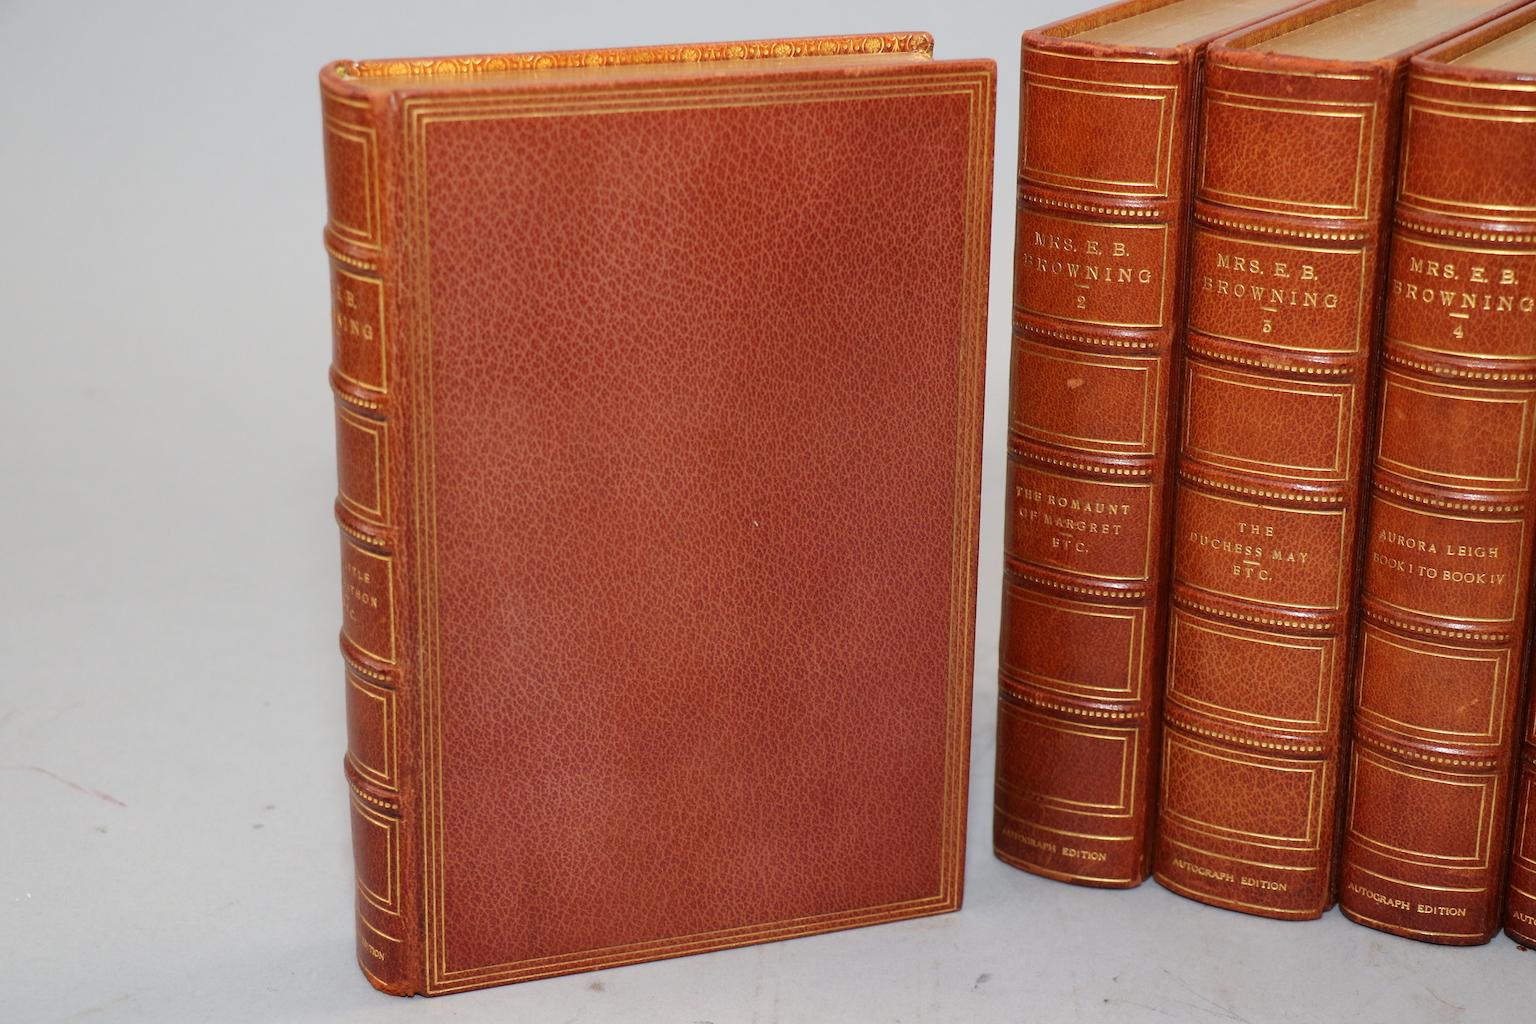 Dyed Books, The Complete Works of E.B. Browning